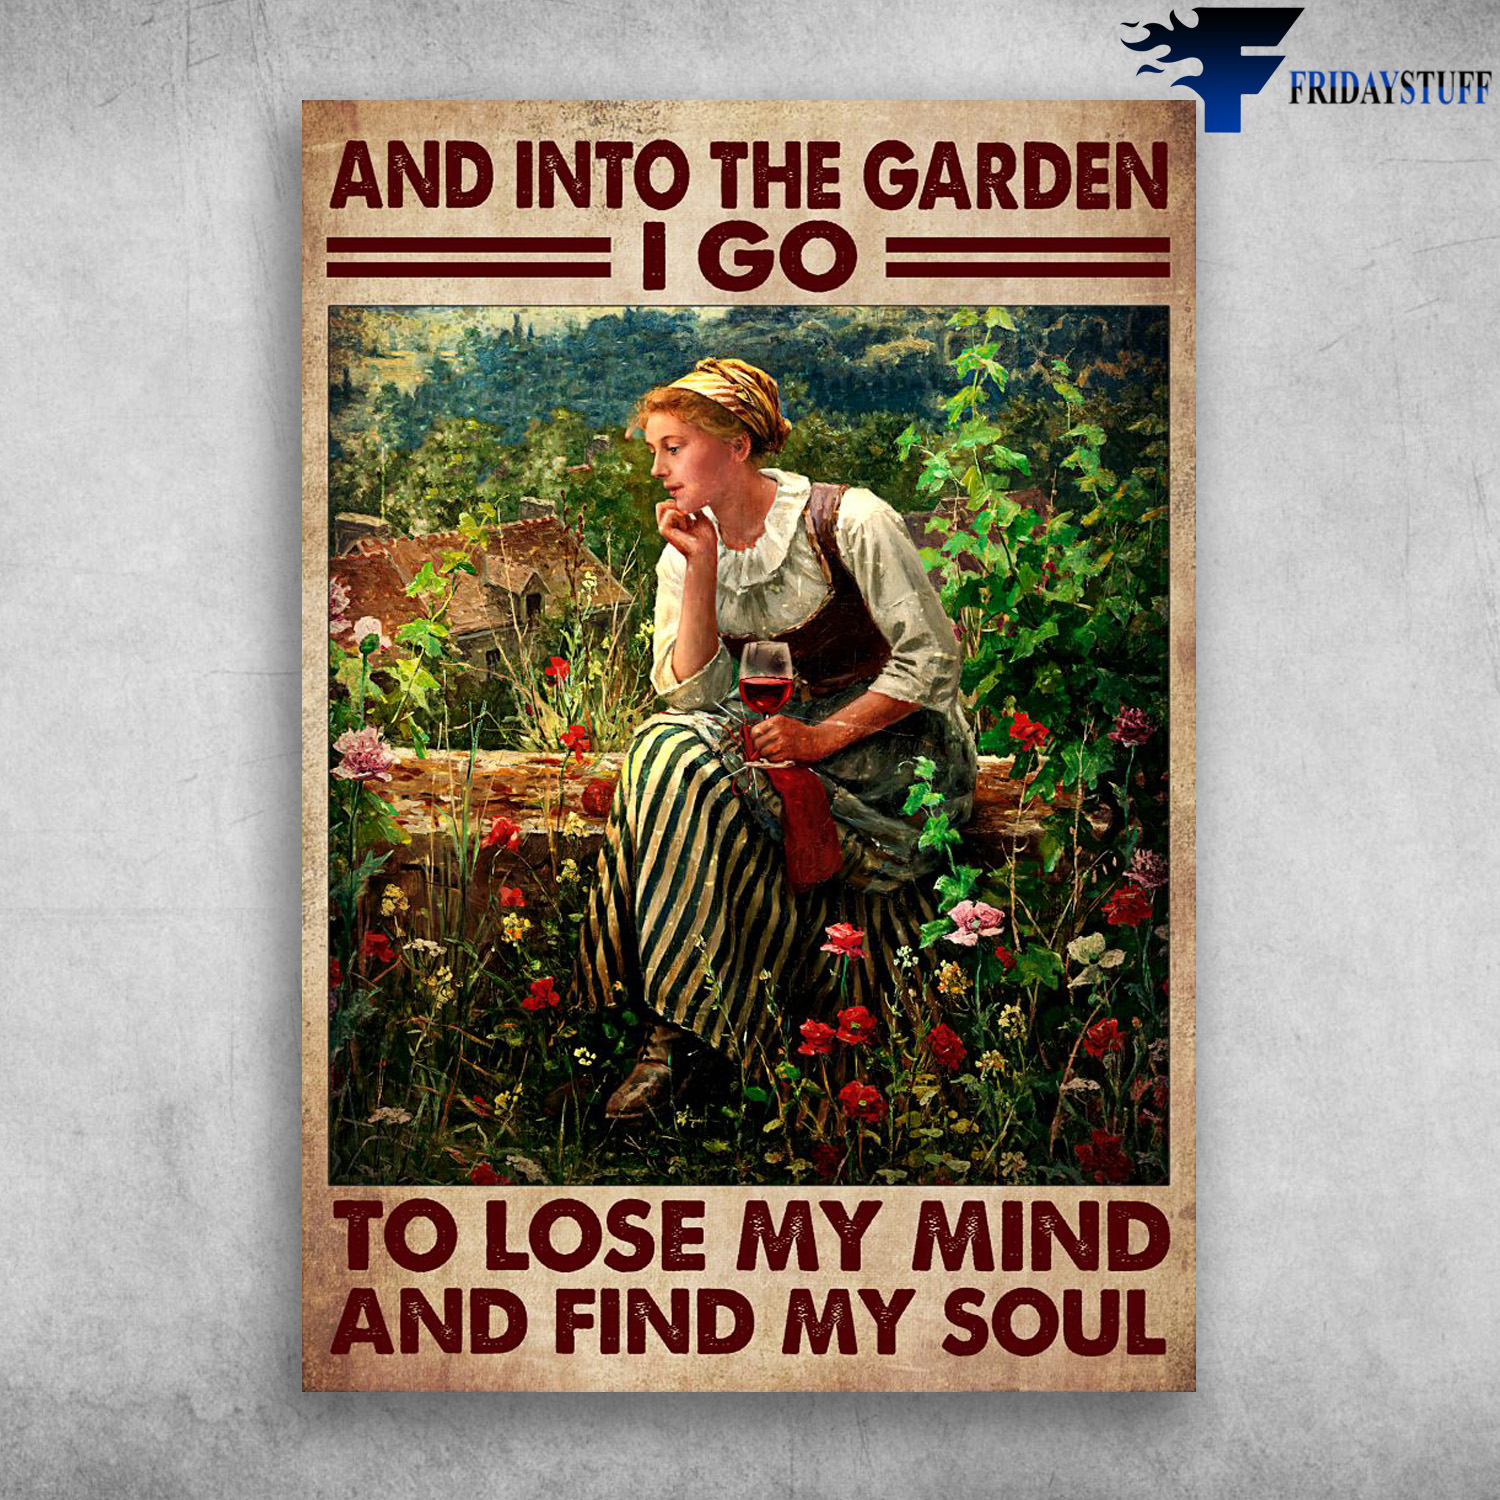 Girl Gardening And Wine - And Into The Garden, I Go To Lose My Mind, And Find My Soul